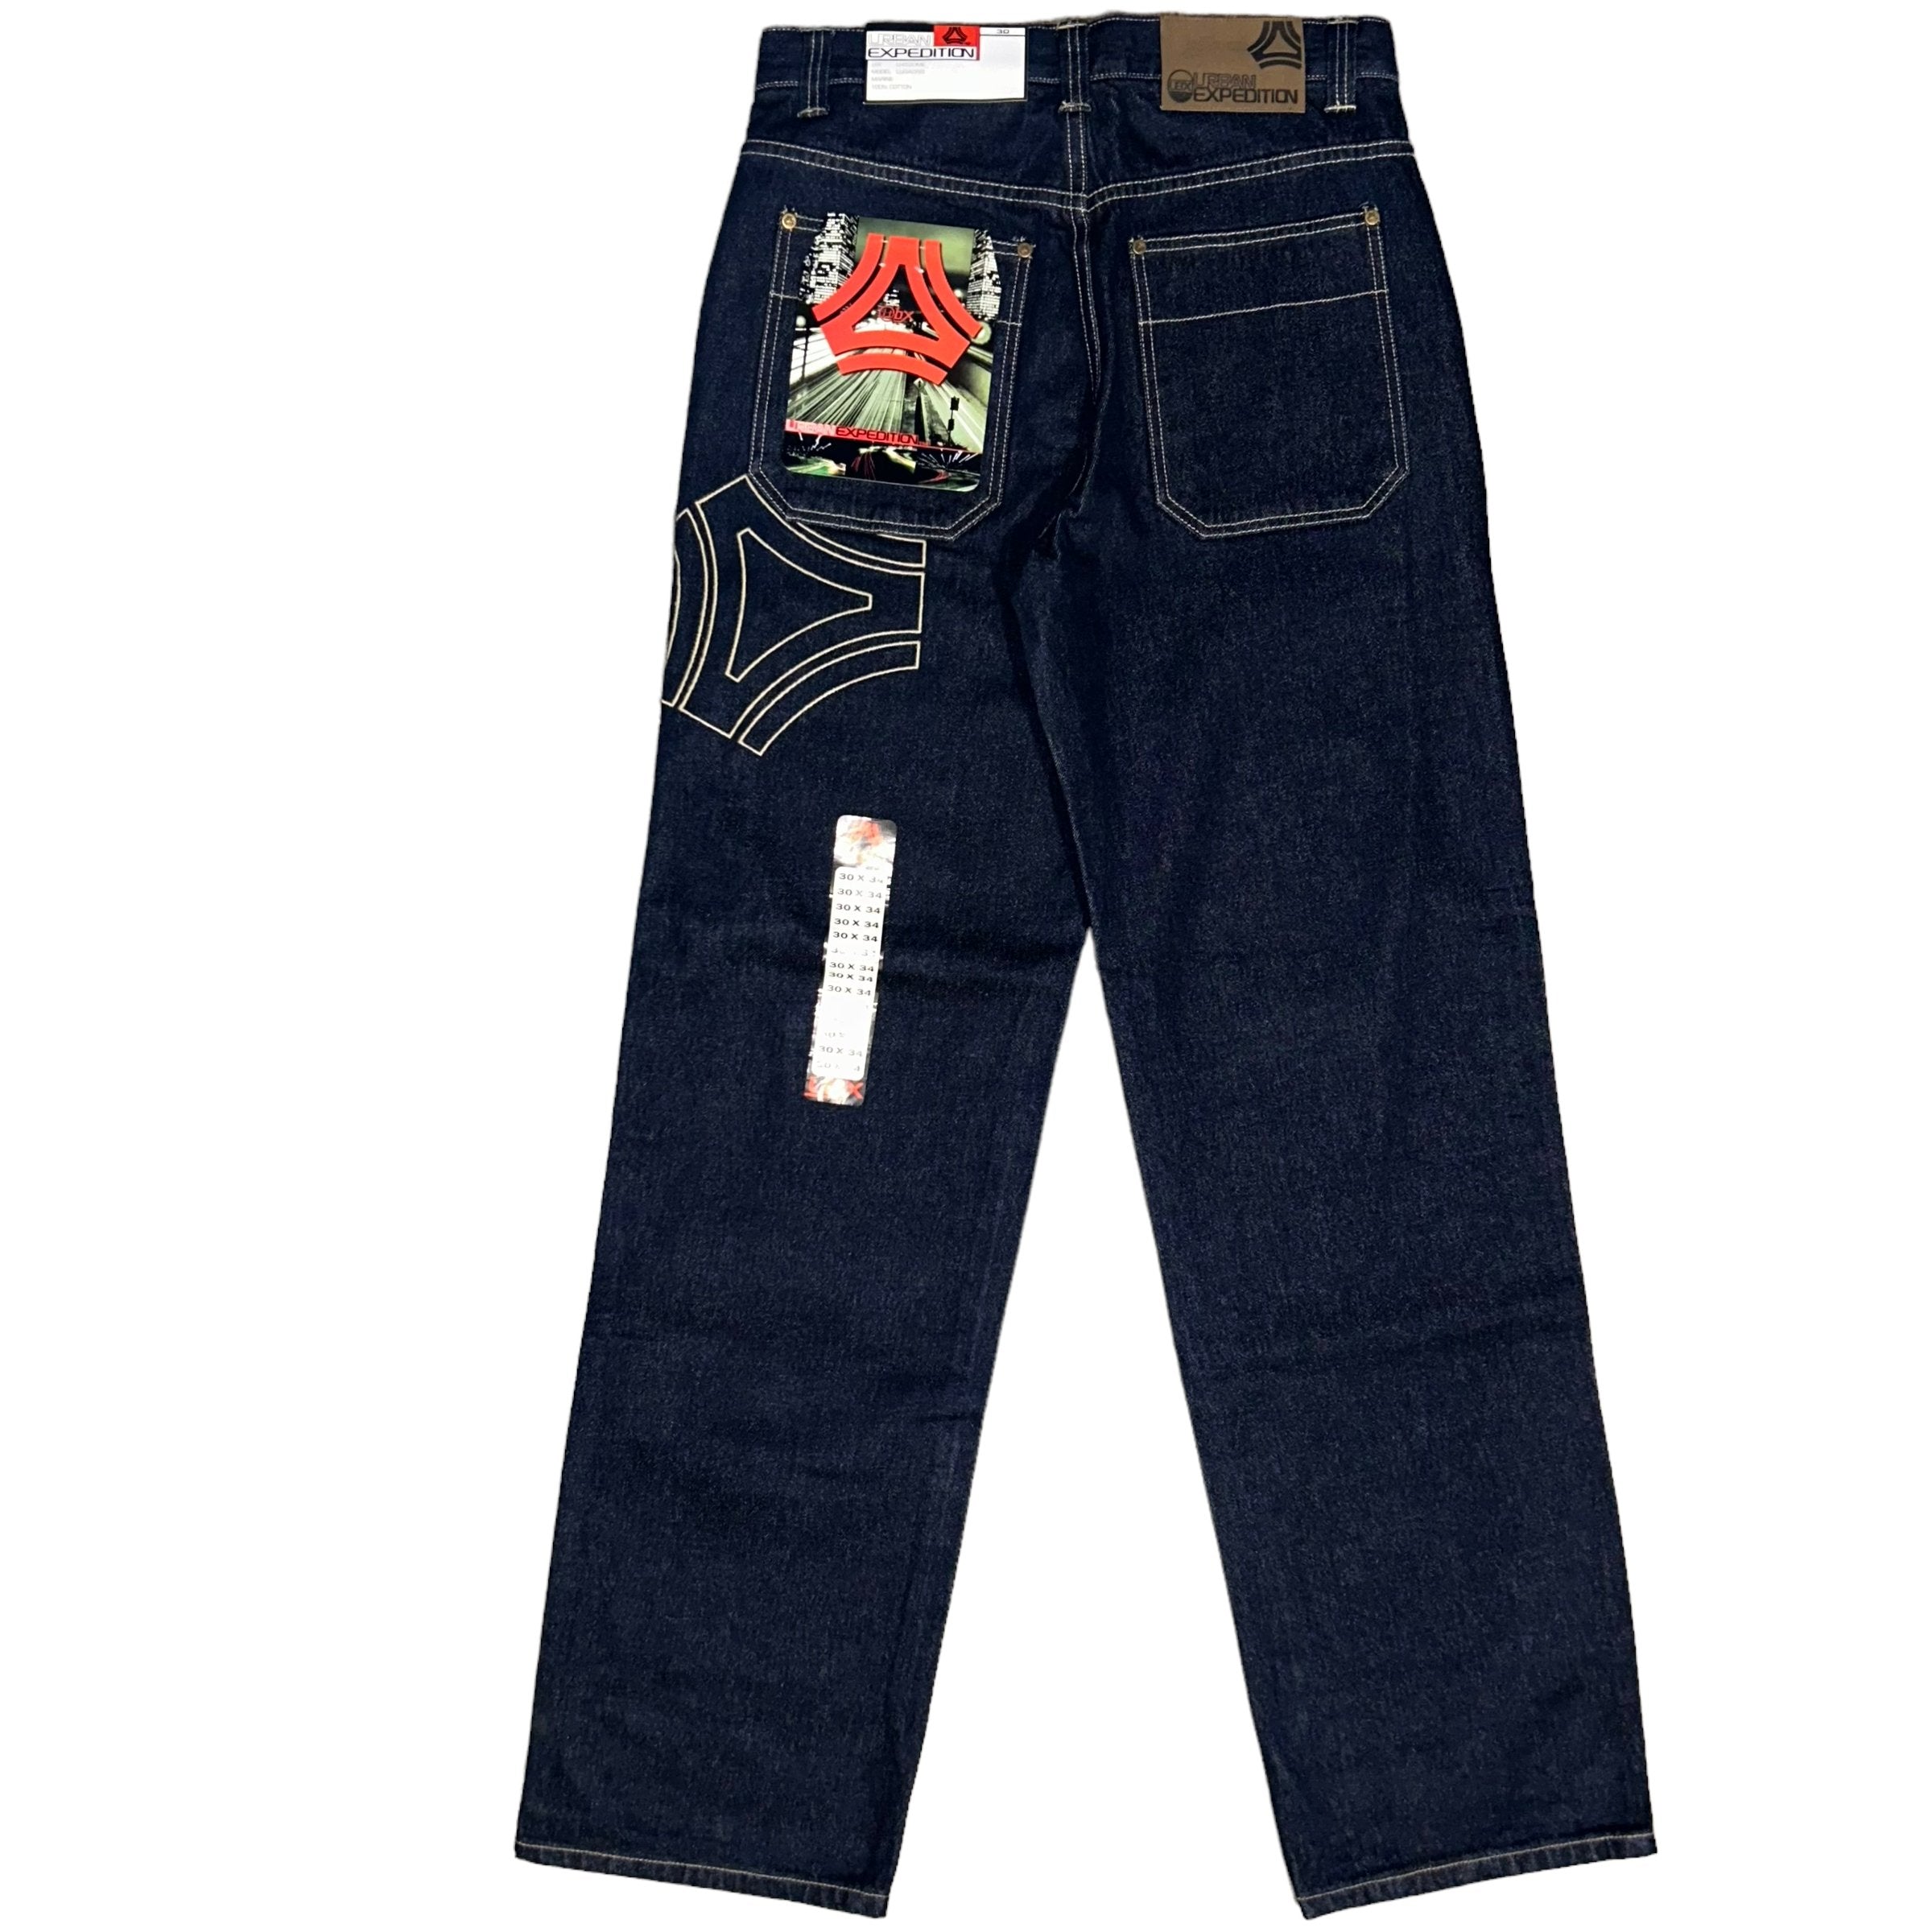 Urban Expedition UBX vintage baggy jeans – oldstyleclothing